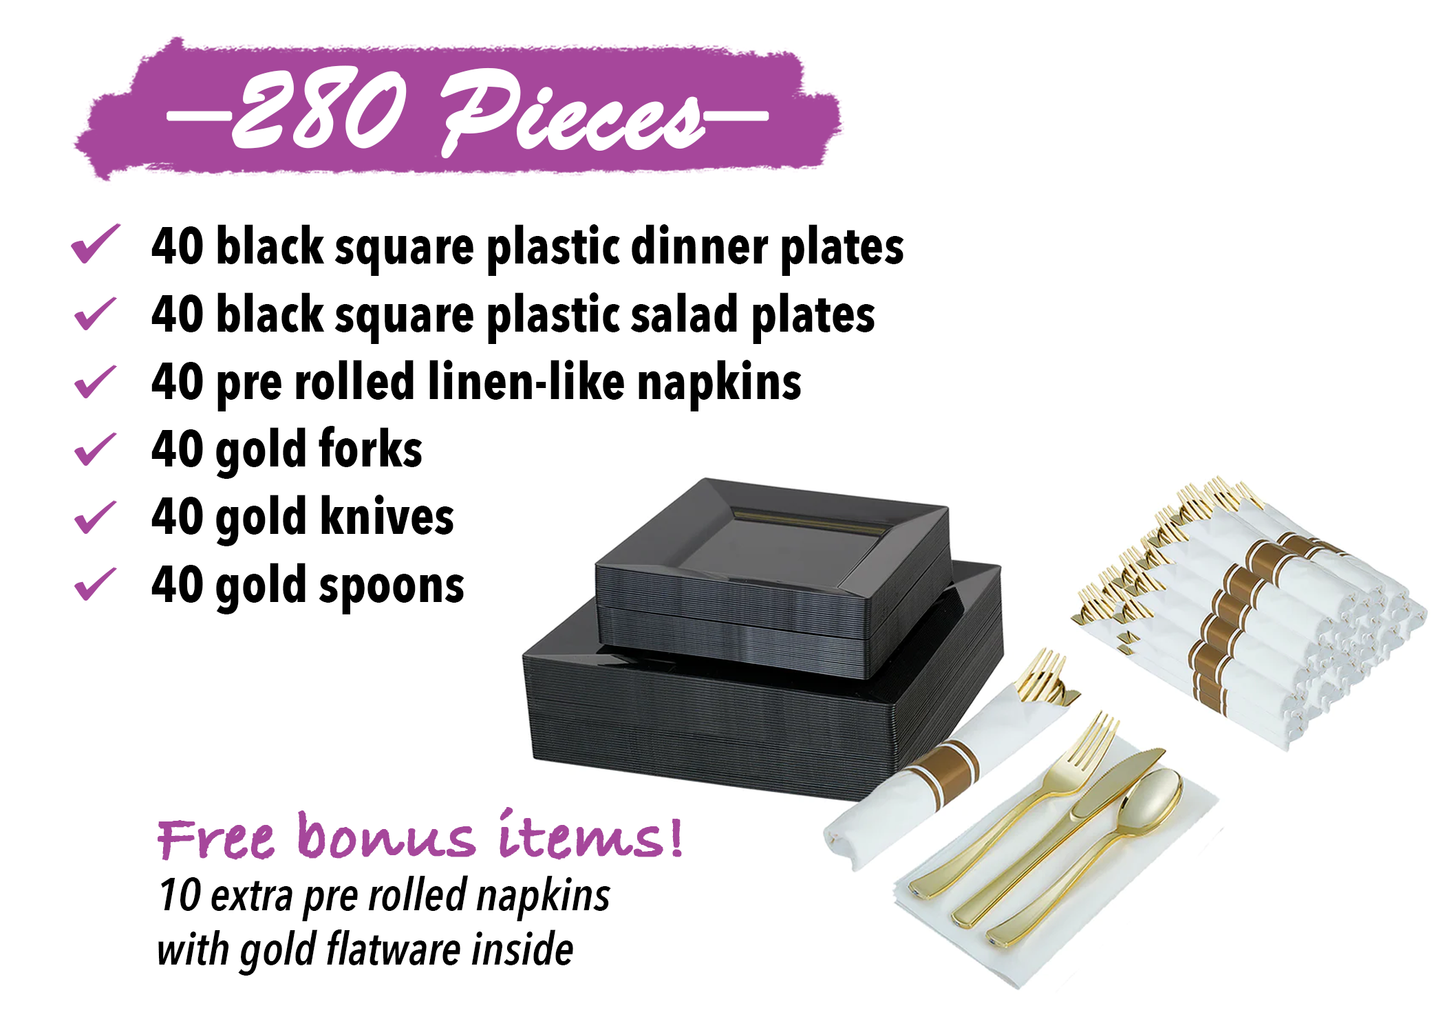 Disposable dinnerware set for 40 guests 280 pieces Includes: 40 black square plastic dinner plates, 40 salad plates, 50 pre-rolled linen feel napkins with gold spoons, forks & knives wrapped inside.